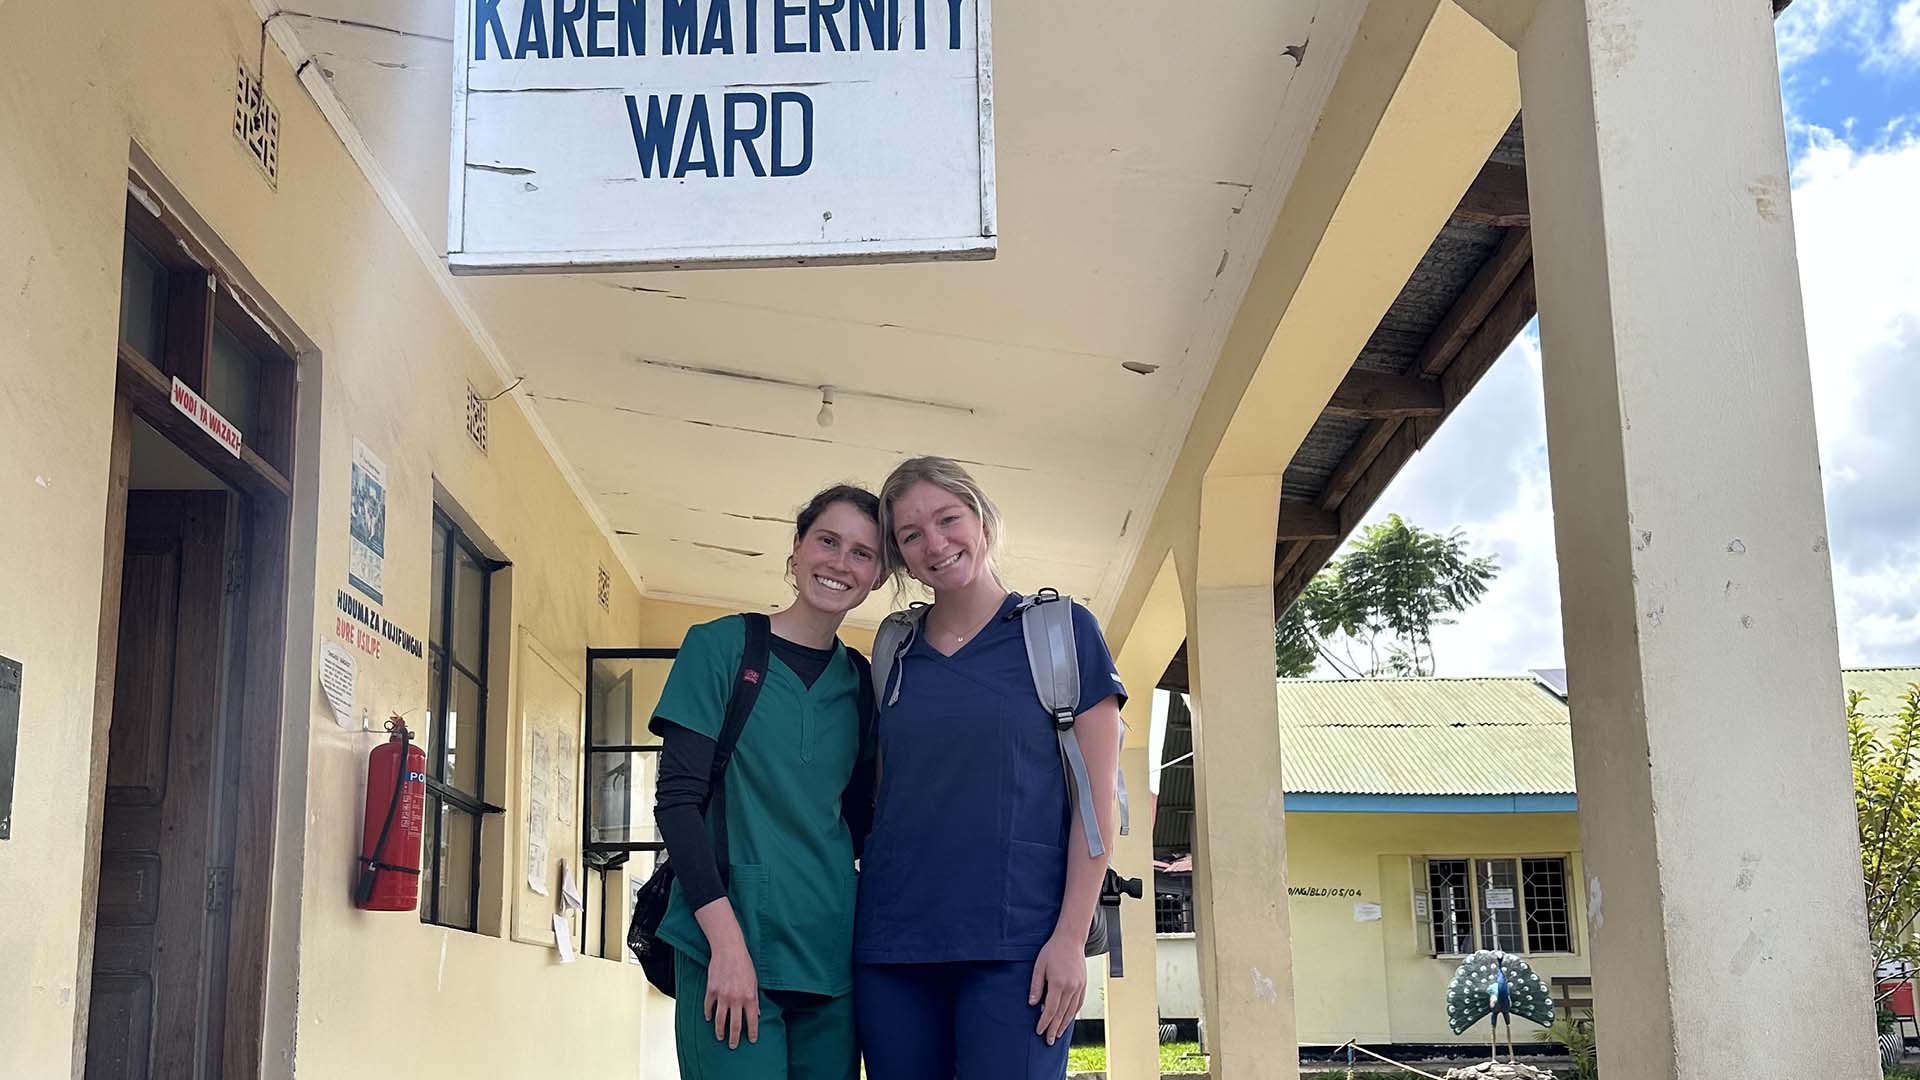 Nursing students lend a hand, gain experience in Guatemala